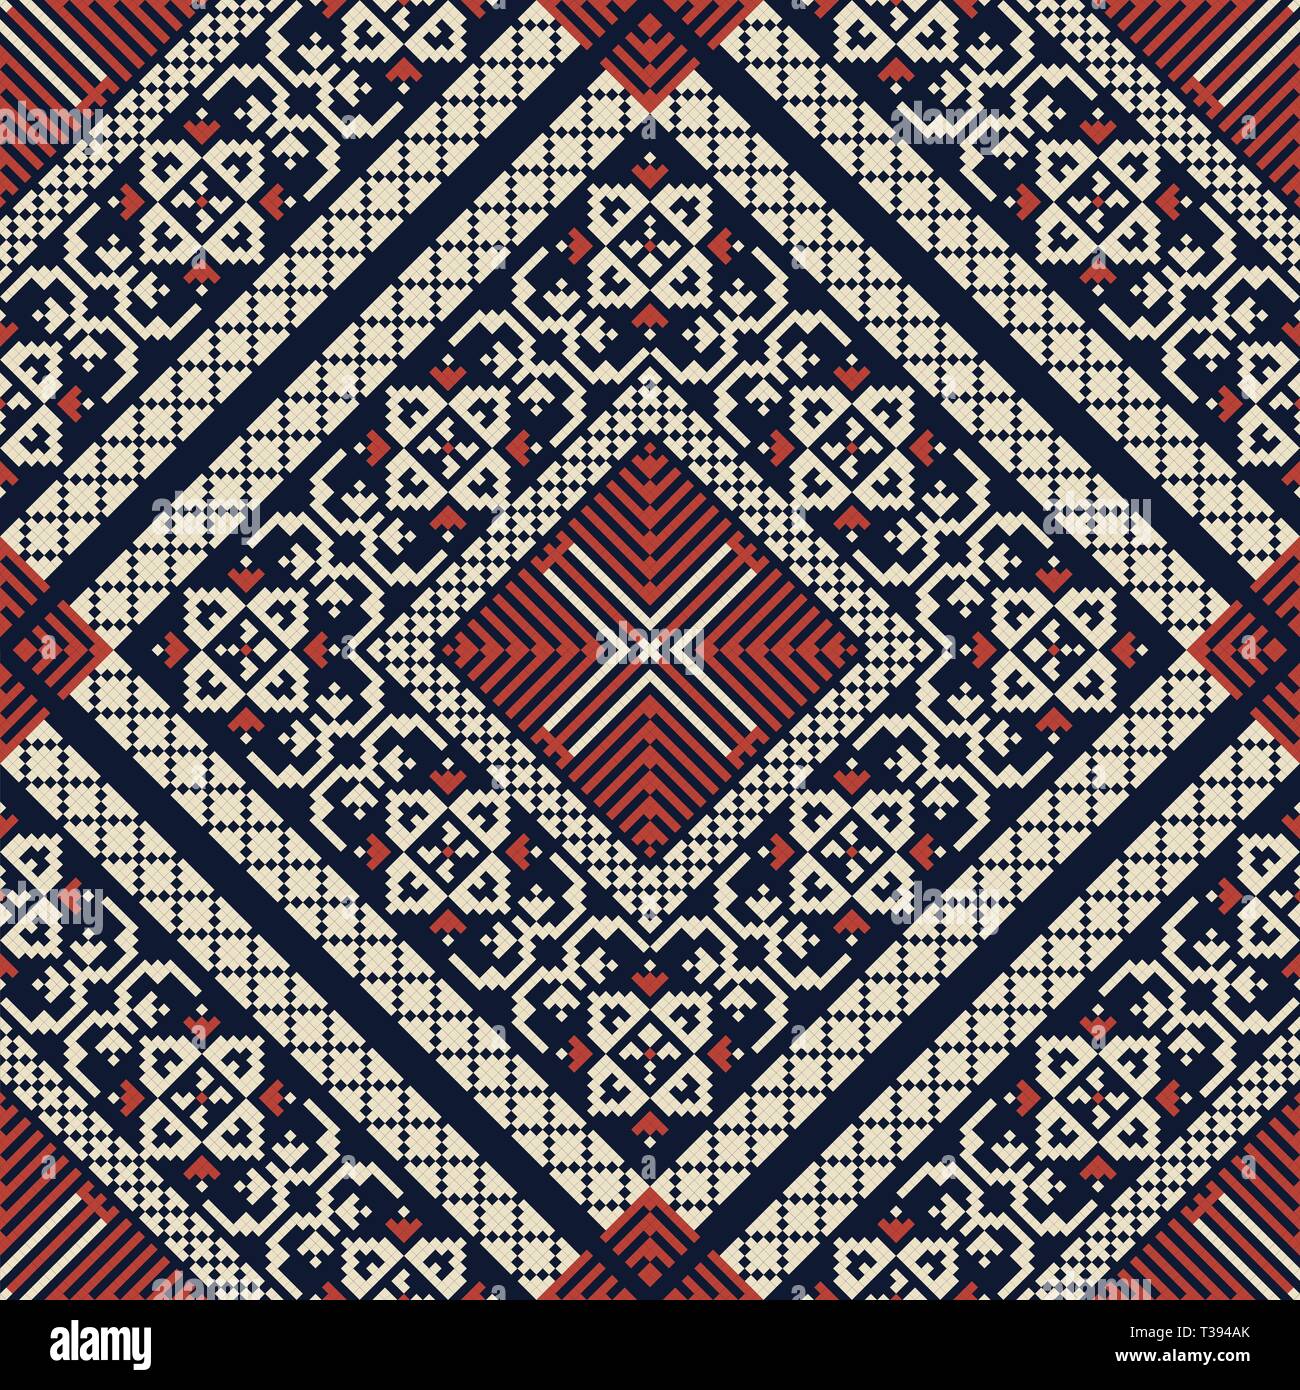 Seamless pattern design with traditional Palestinian embroidery motif ...